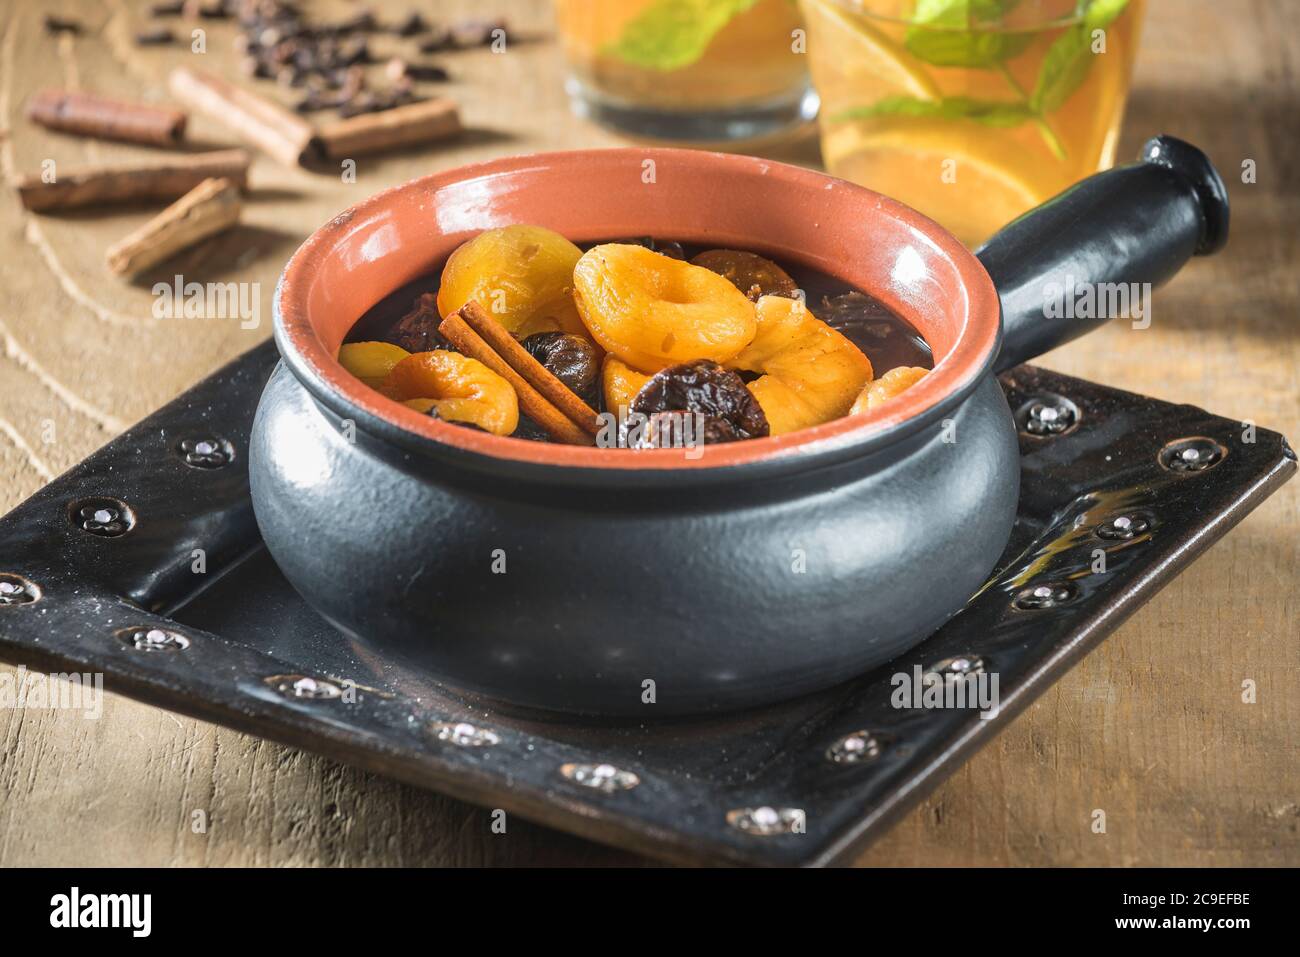 Dried fruit compote. Stock Photo